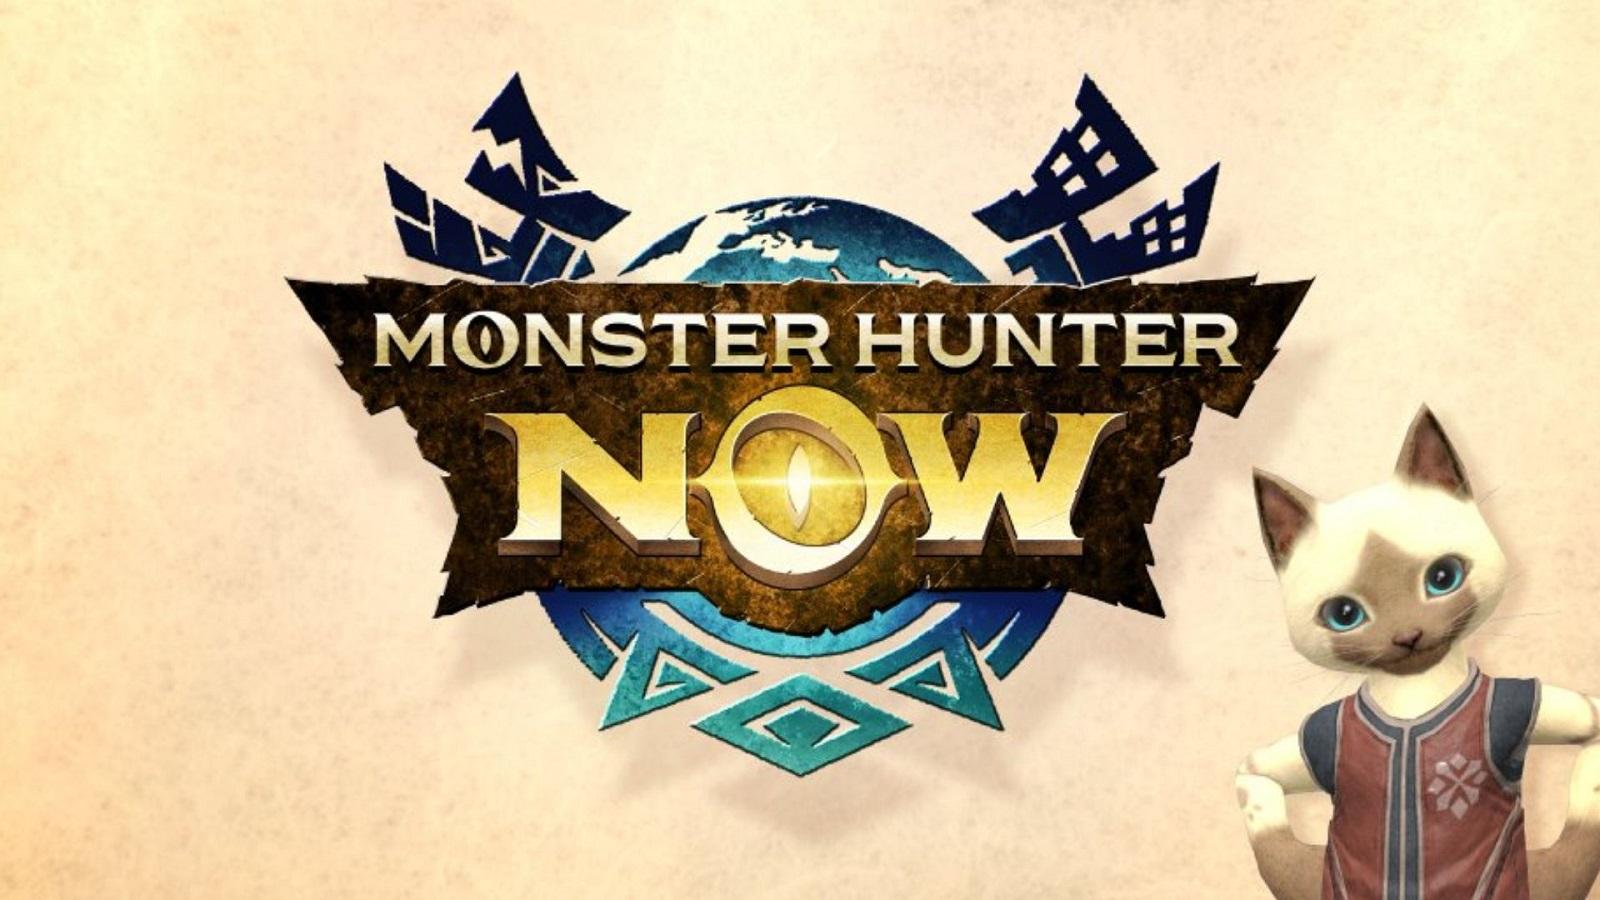 Monster Hunter Now logo with Palico